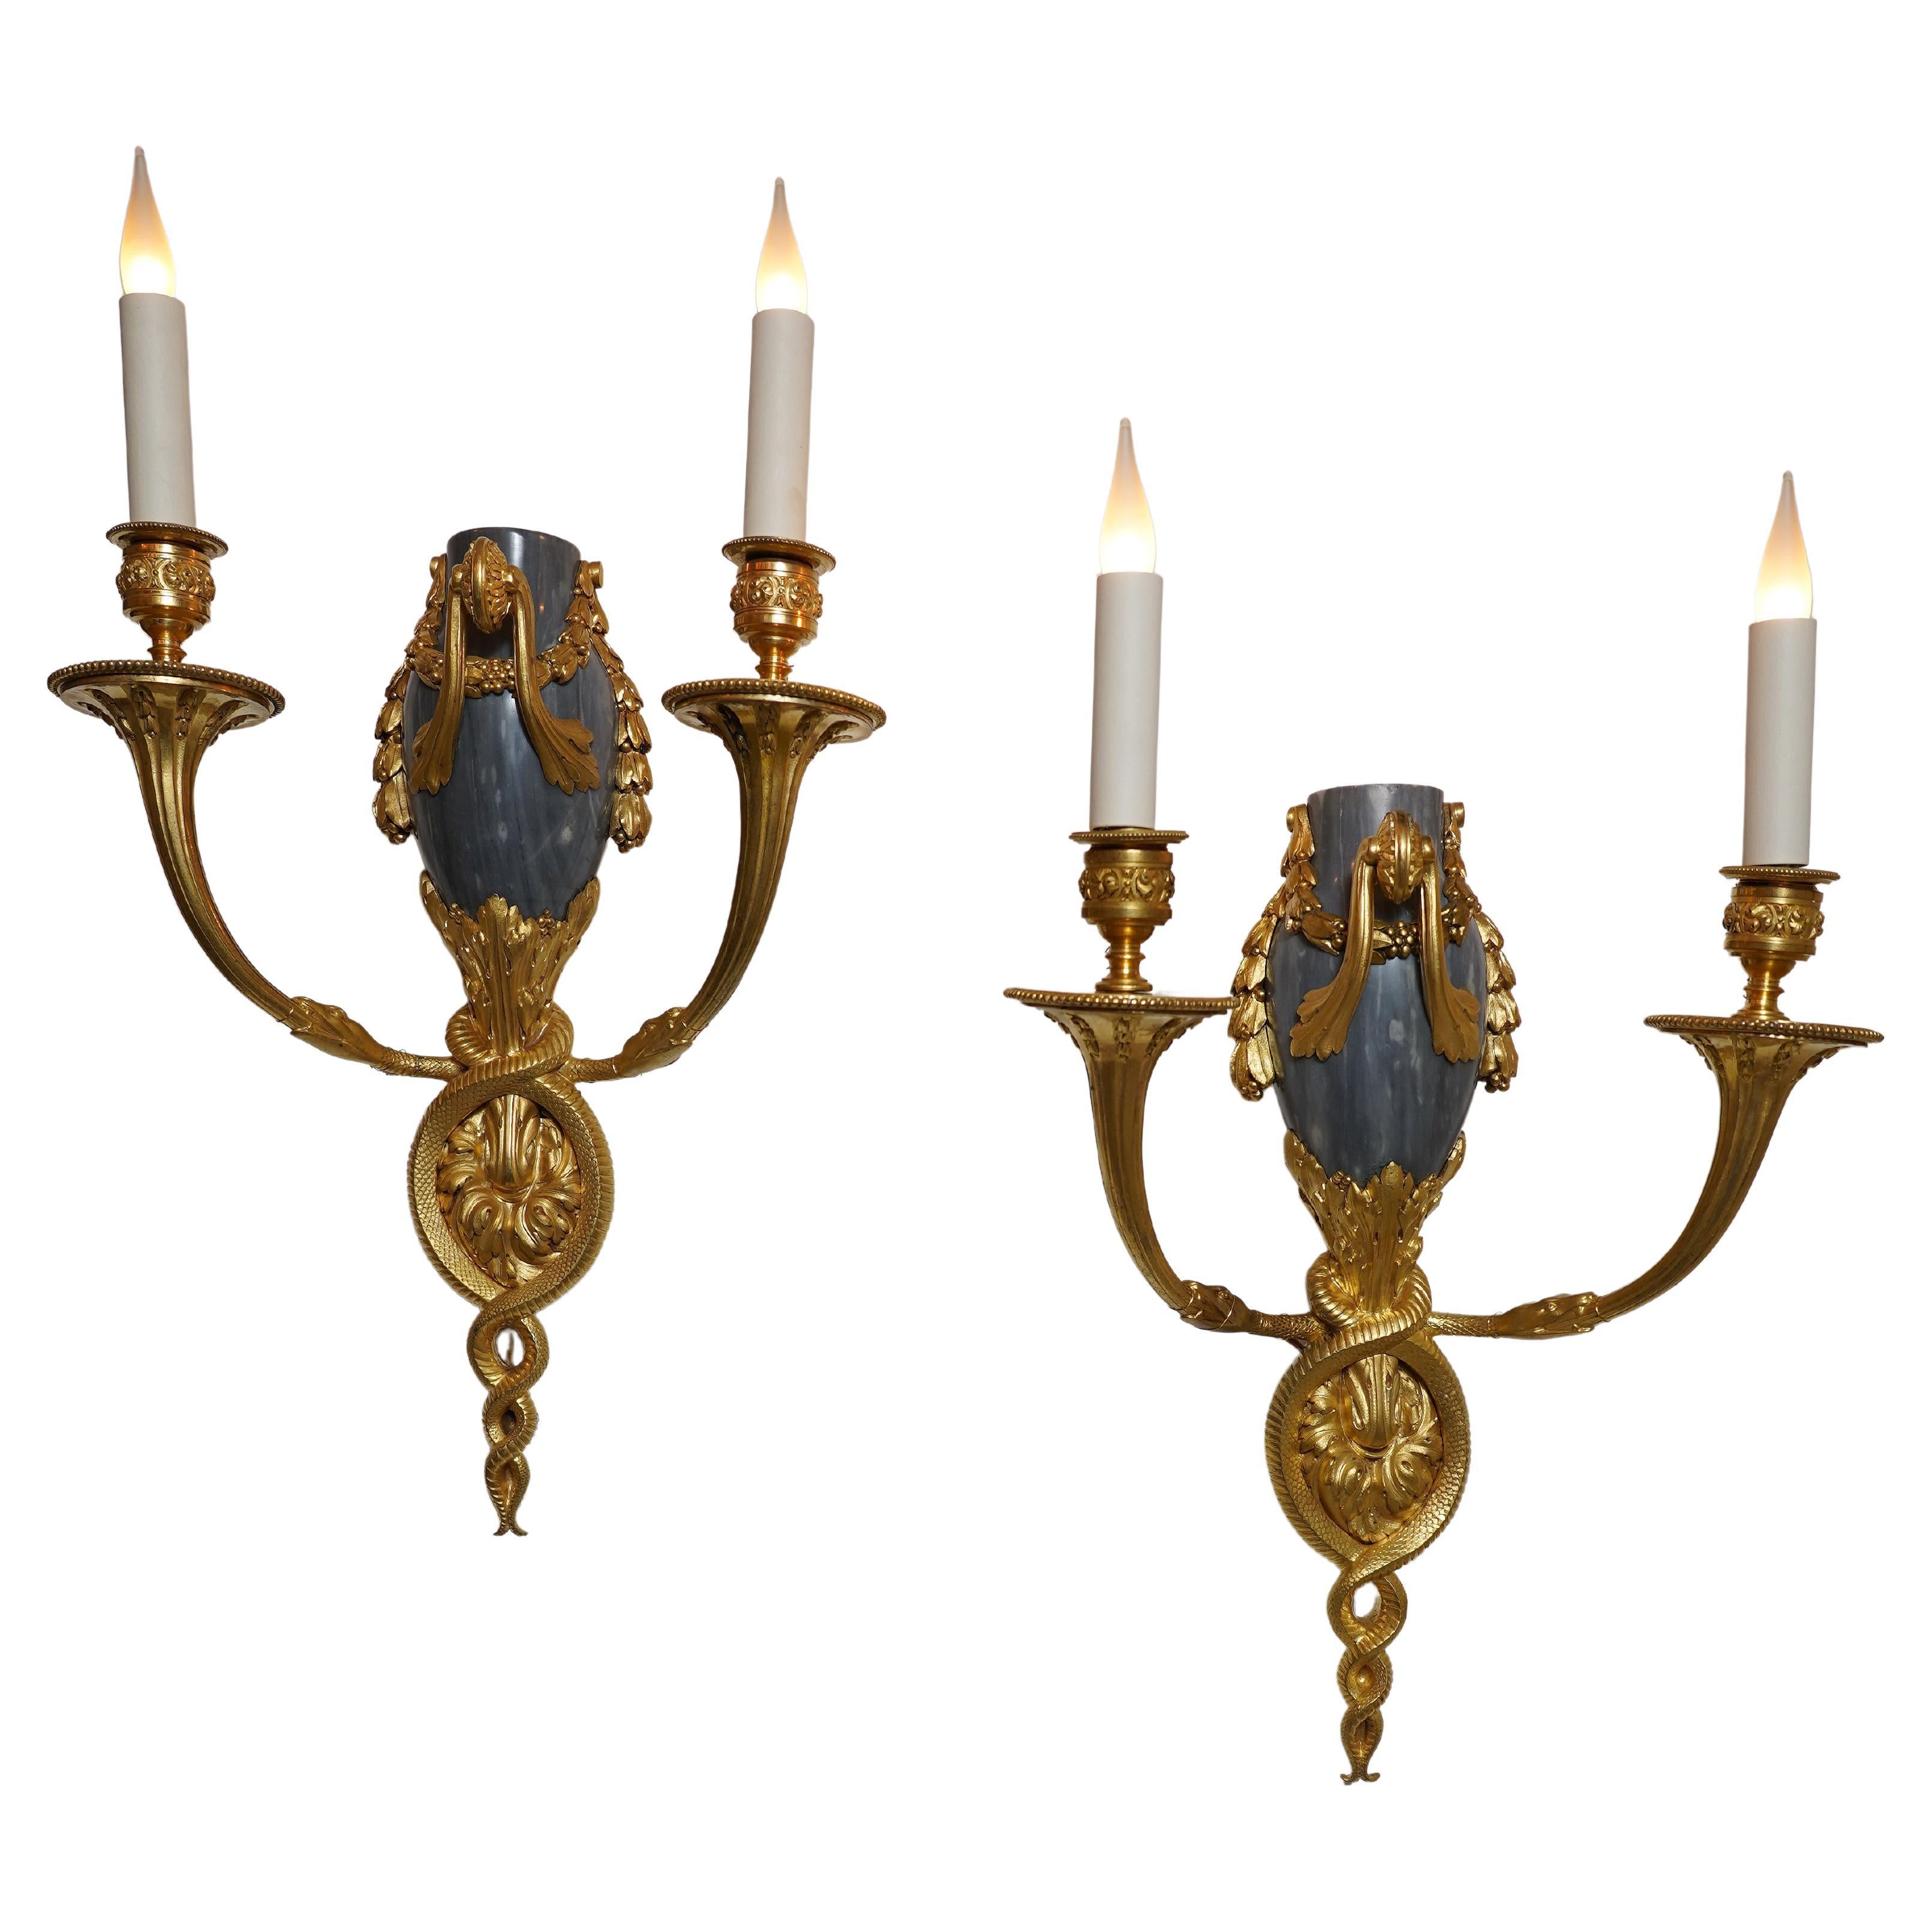 Pair of Gilded Bronze and Marble Wall-Lights attr. to H. Dasson, France, c 1880 For Sale